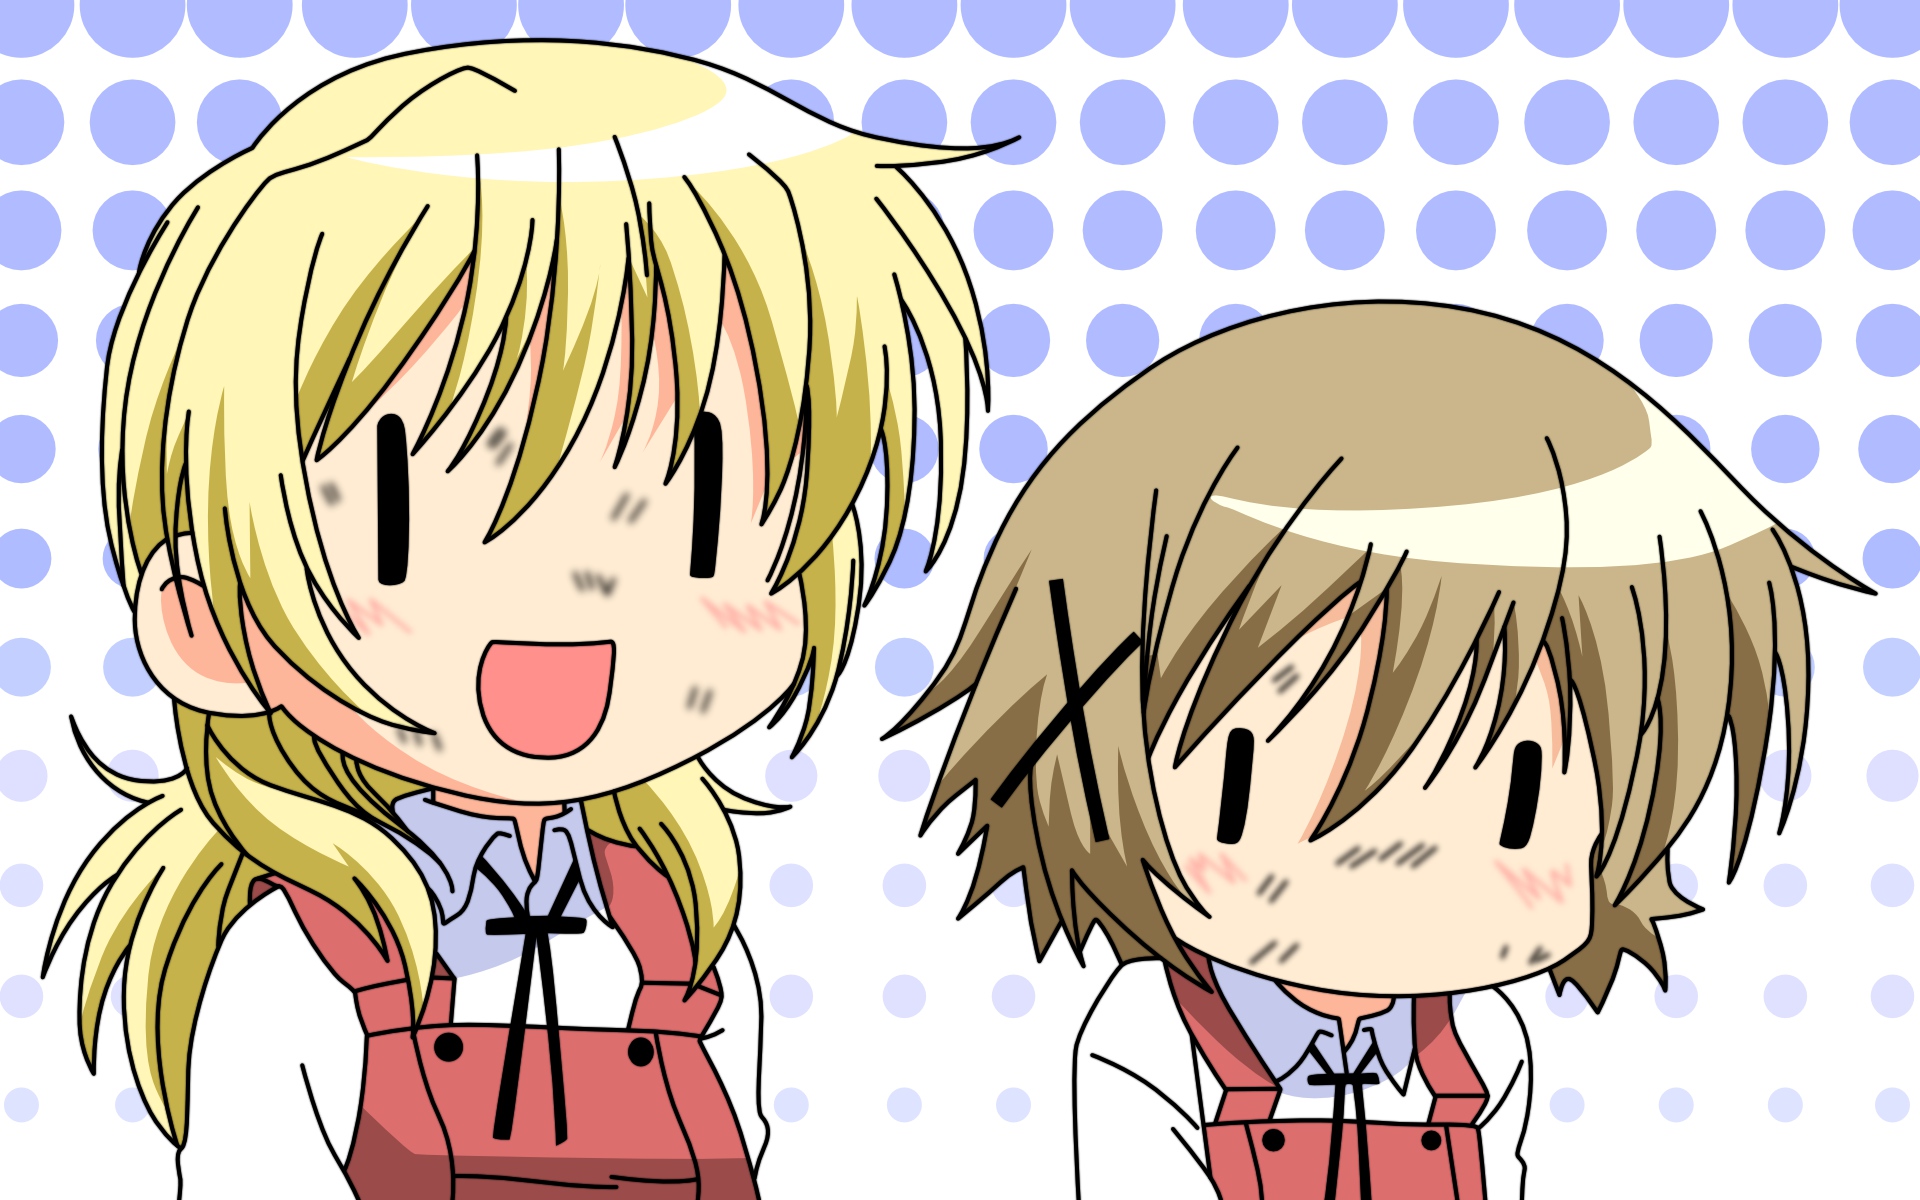 Colorful anime desktop wallpaper featuring characters from Hidamari Sketch.